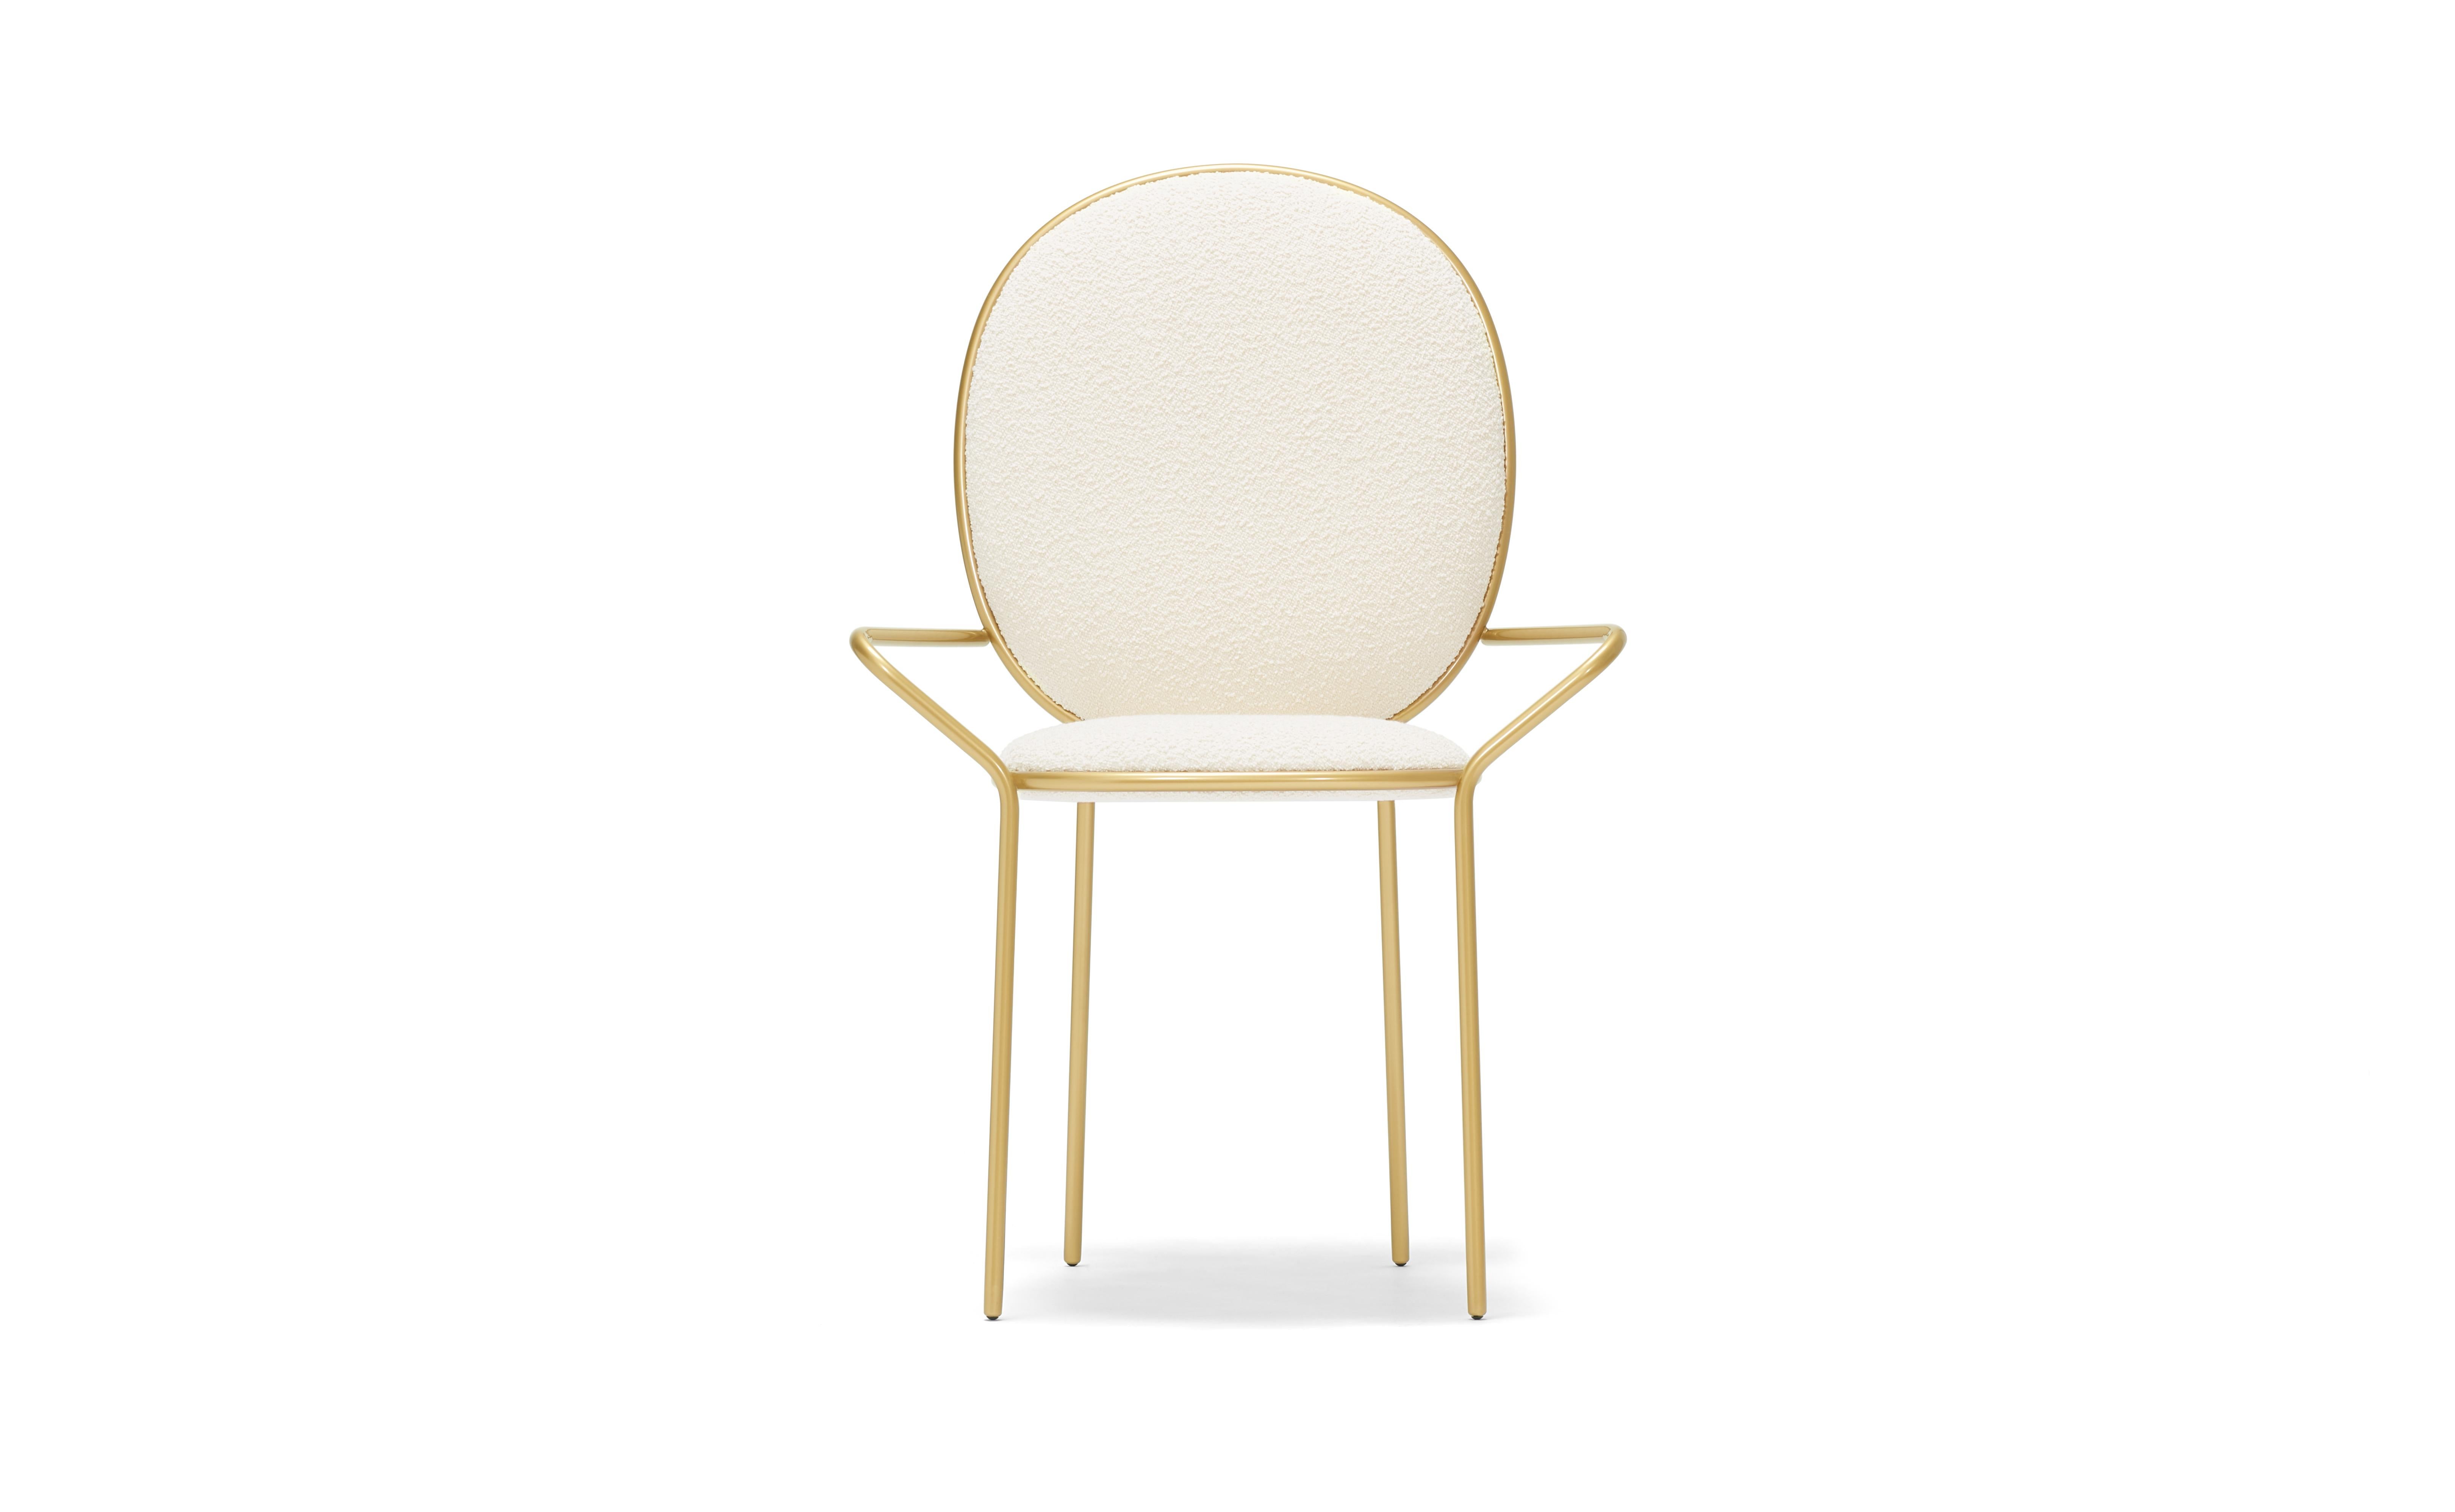 Contemporary ivory upholstered dining armchair - stay by Nika Zupanc

The Stay Family turns everyday seating into a special occasion. The dining chair and dining armchair are variations on an elegant social theme whilst the dining table adds a